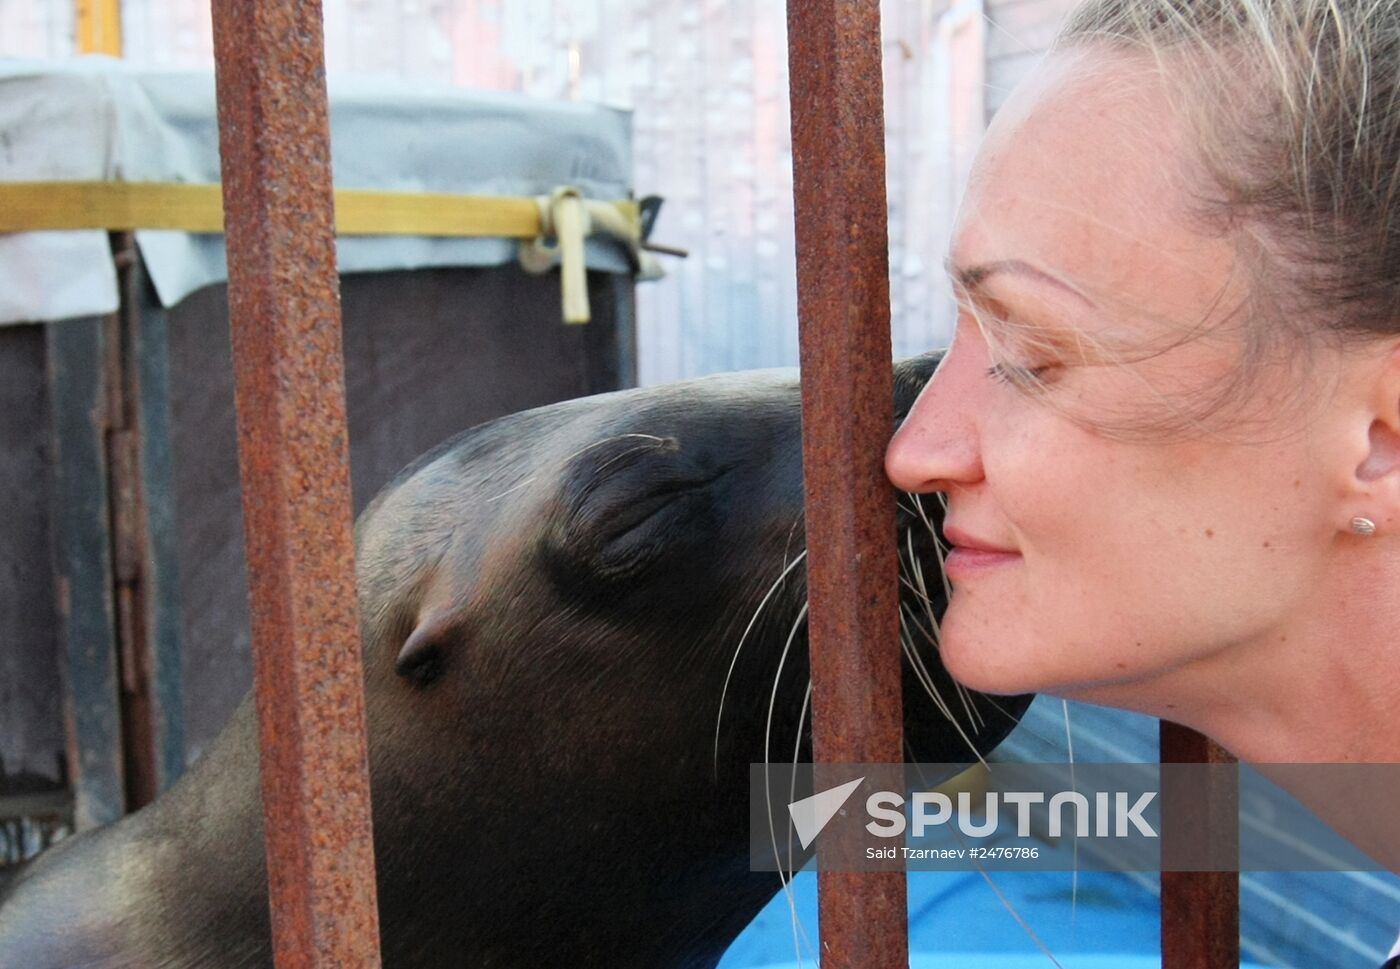 A sea lion was born during a tour of the Moscow circus